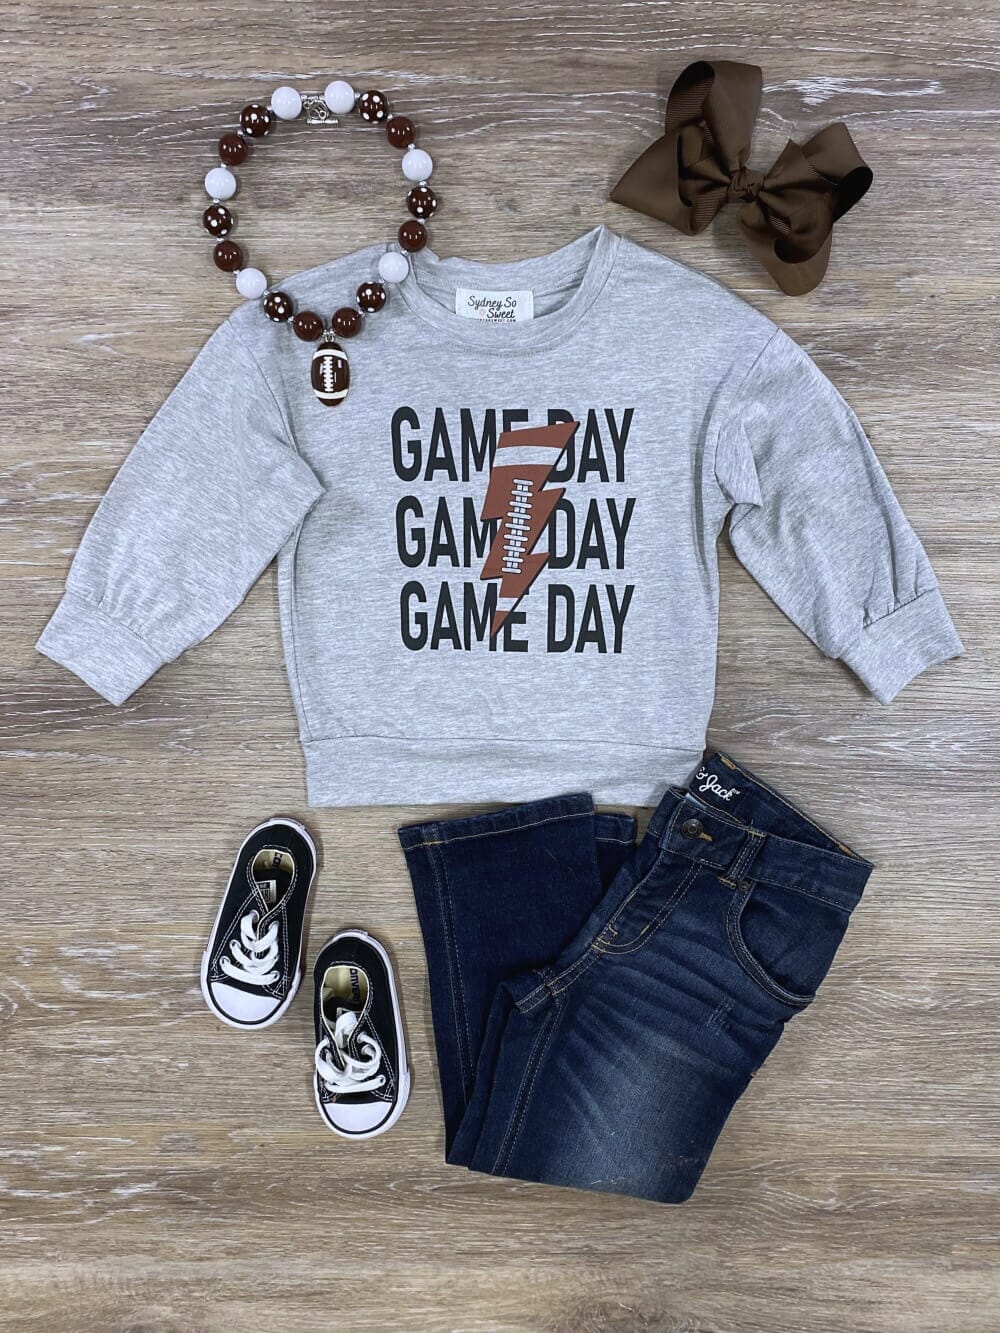 Football Game Day Long Sleeve Gray Pullover Top - Sydney So Sweet